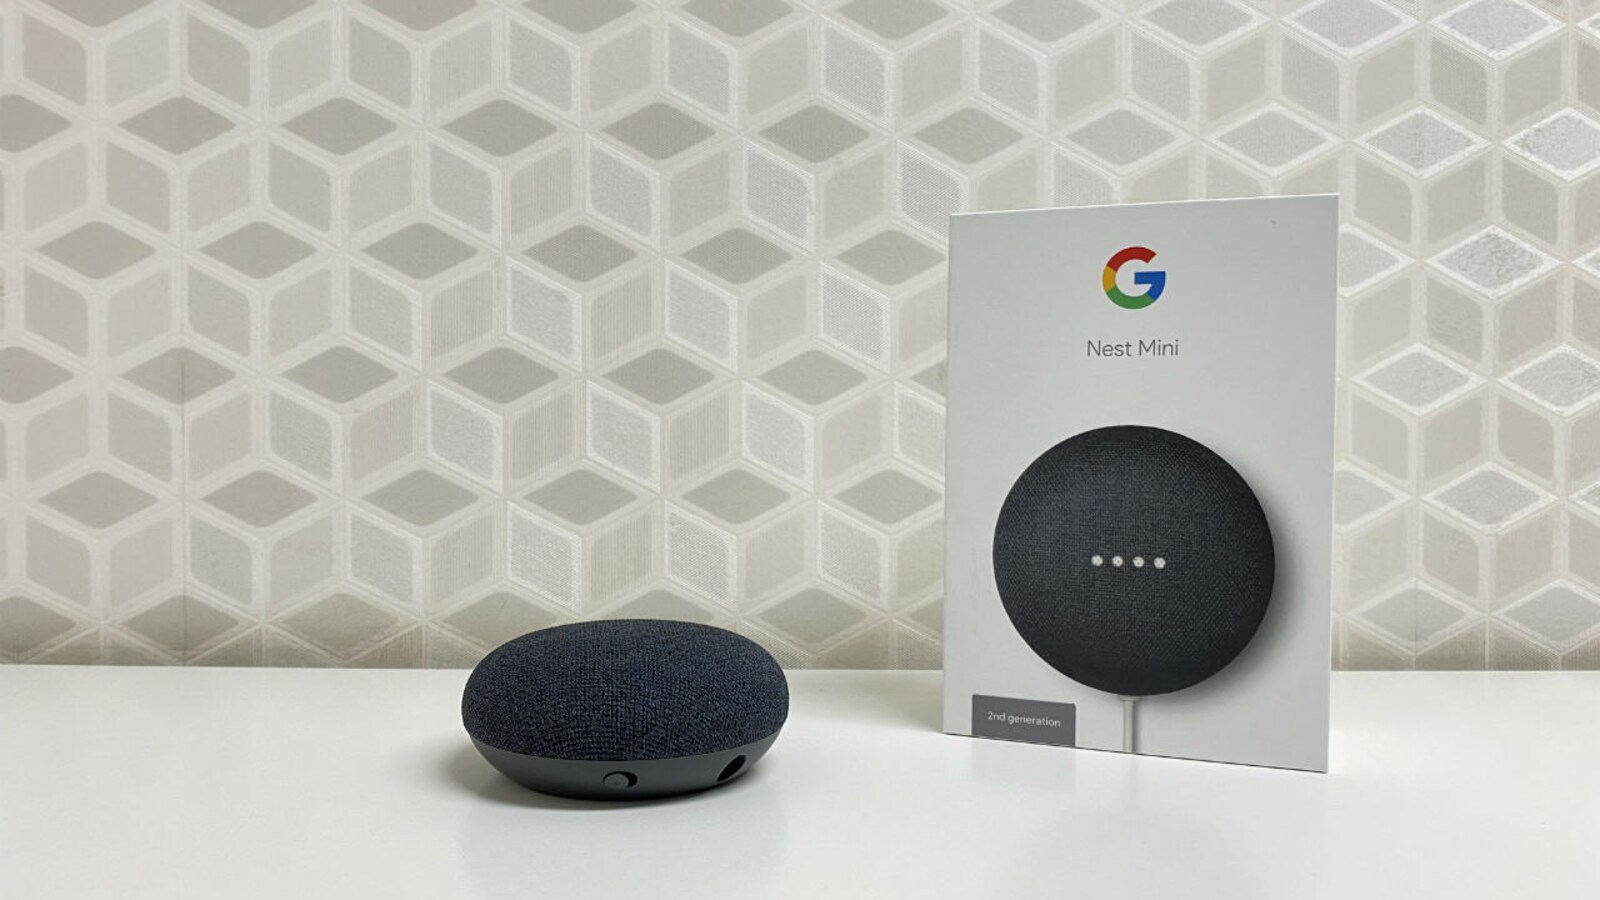 https://images.moneycontrol.com/static-mcnews/2019/11/Google-Home-Mini-box-1.jpg?impolicy=website&width=1600&height=900